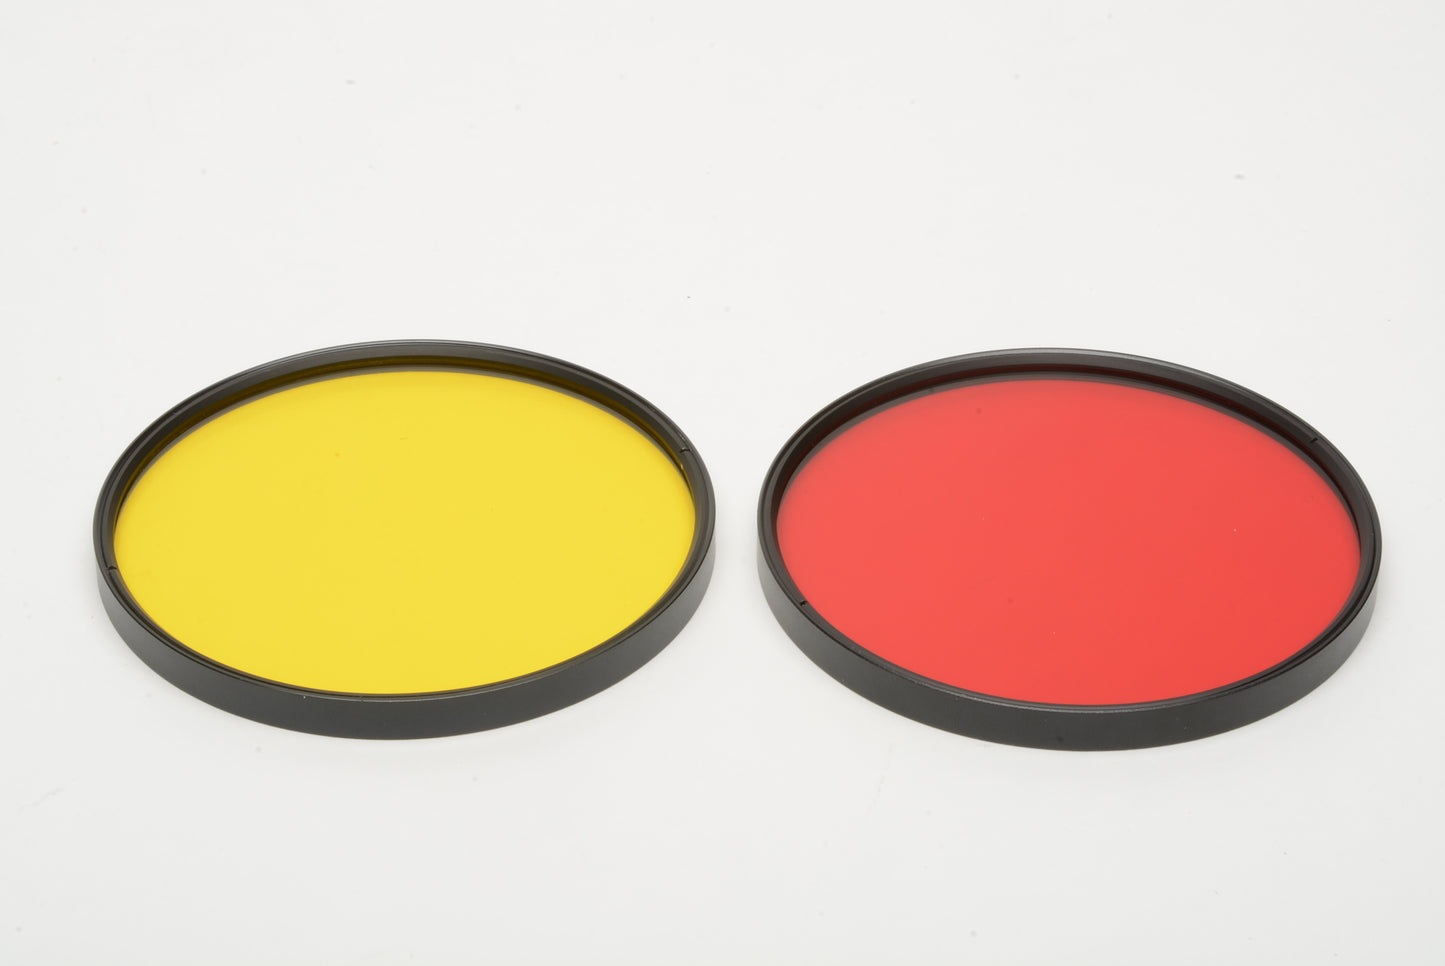 Set of 2X Tiffen Series 9 B&W contrast filters (25 red & 8 Yellow), Clean!